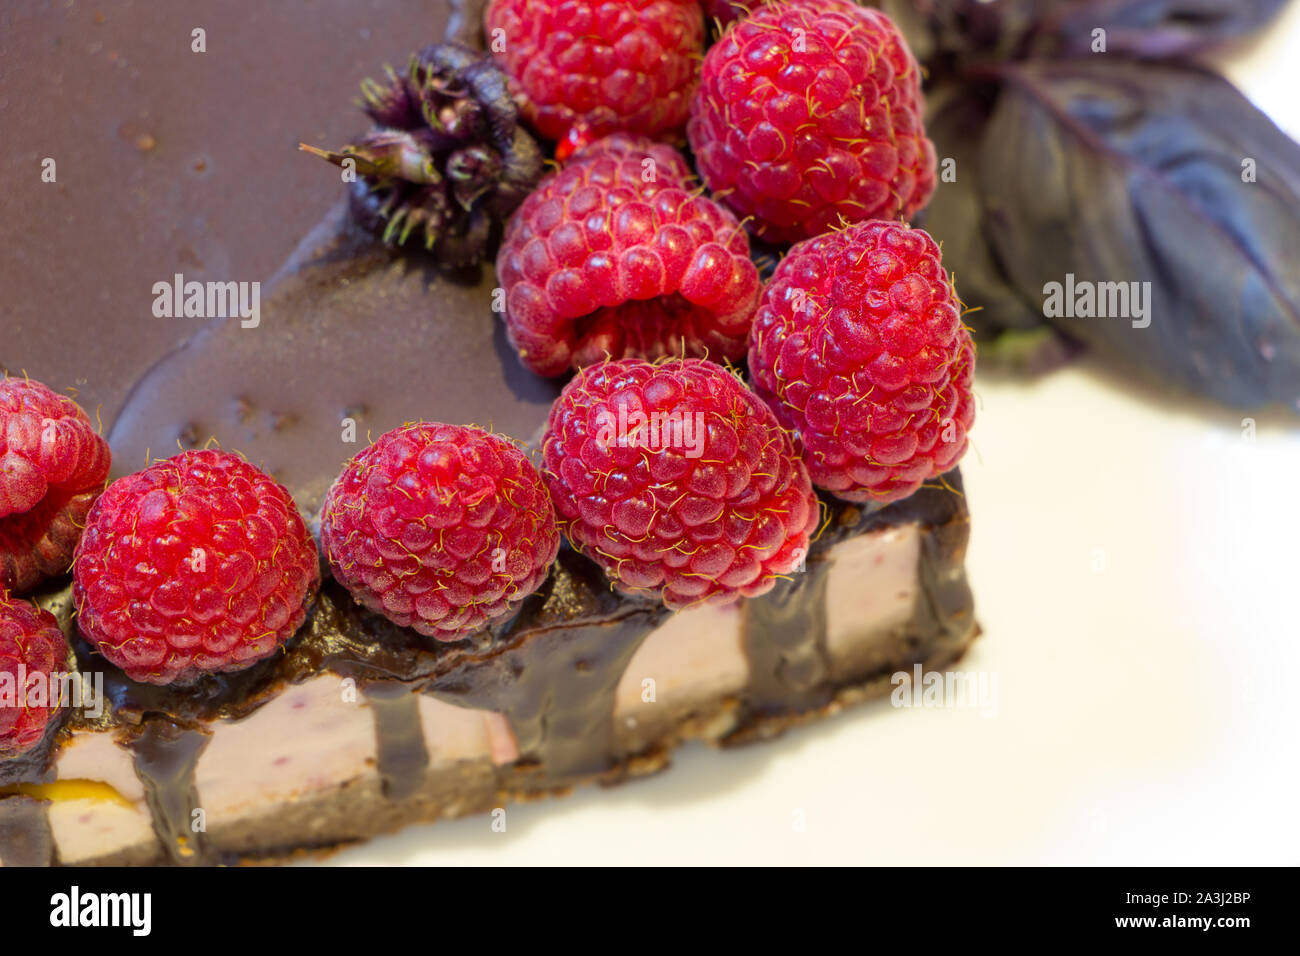 Diet sweets. Close up chocolate vegan cake with raspberries on white plate with basil leaves. Homemade natural product from harmless ingredients. Stock Photo